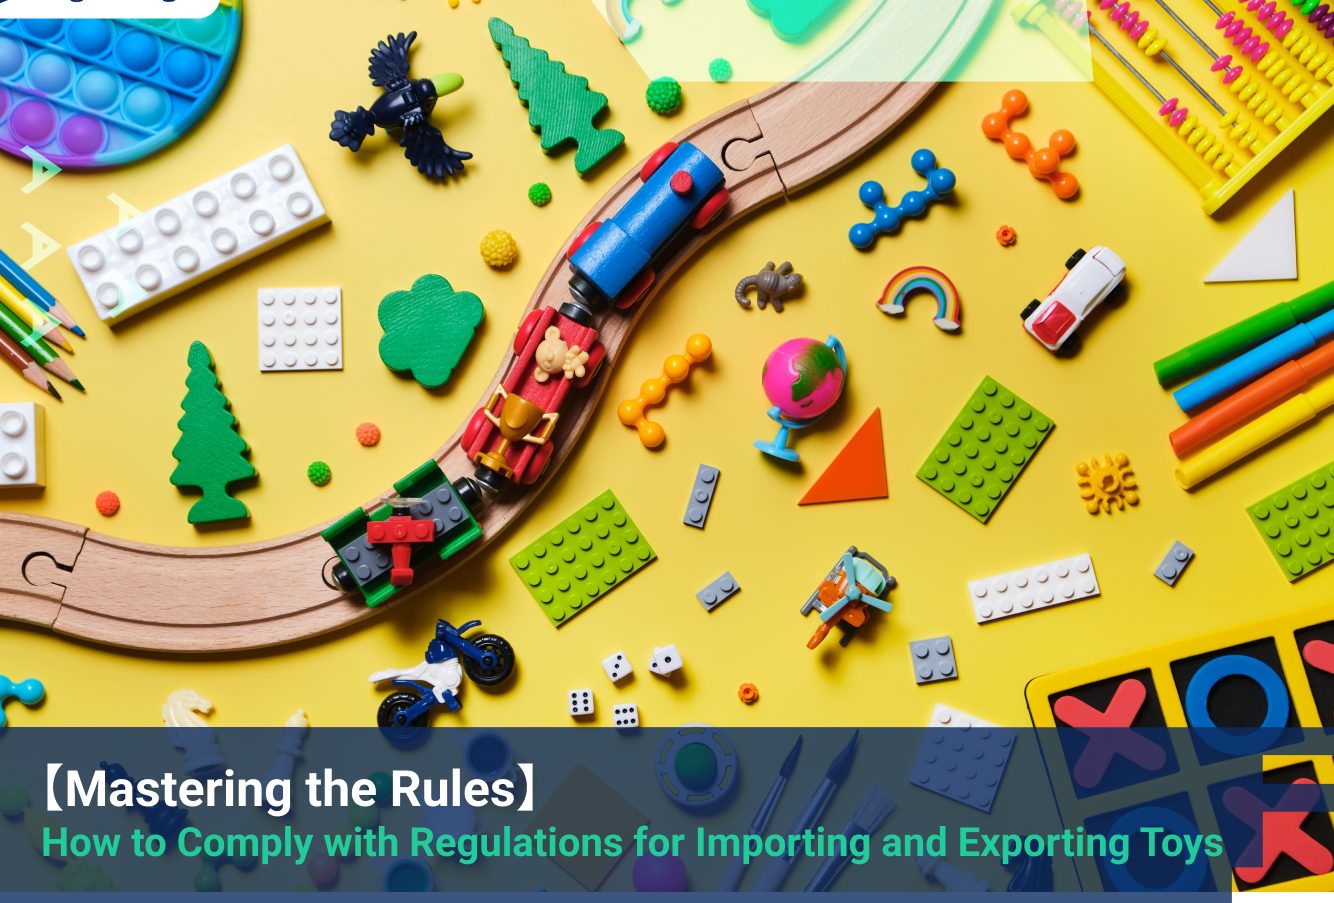 【Mastering the Rules】 How to Comply with Regulations for Importing and Exporting Toys